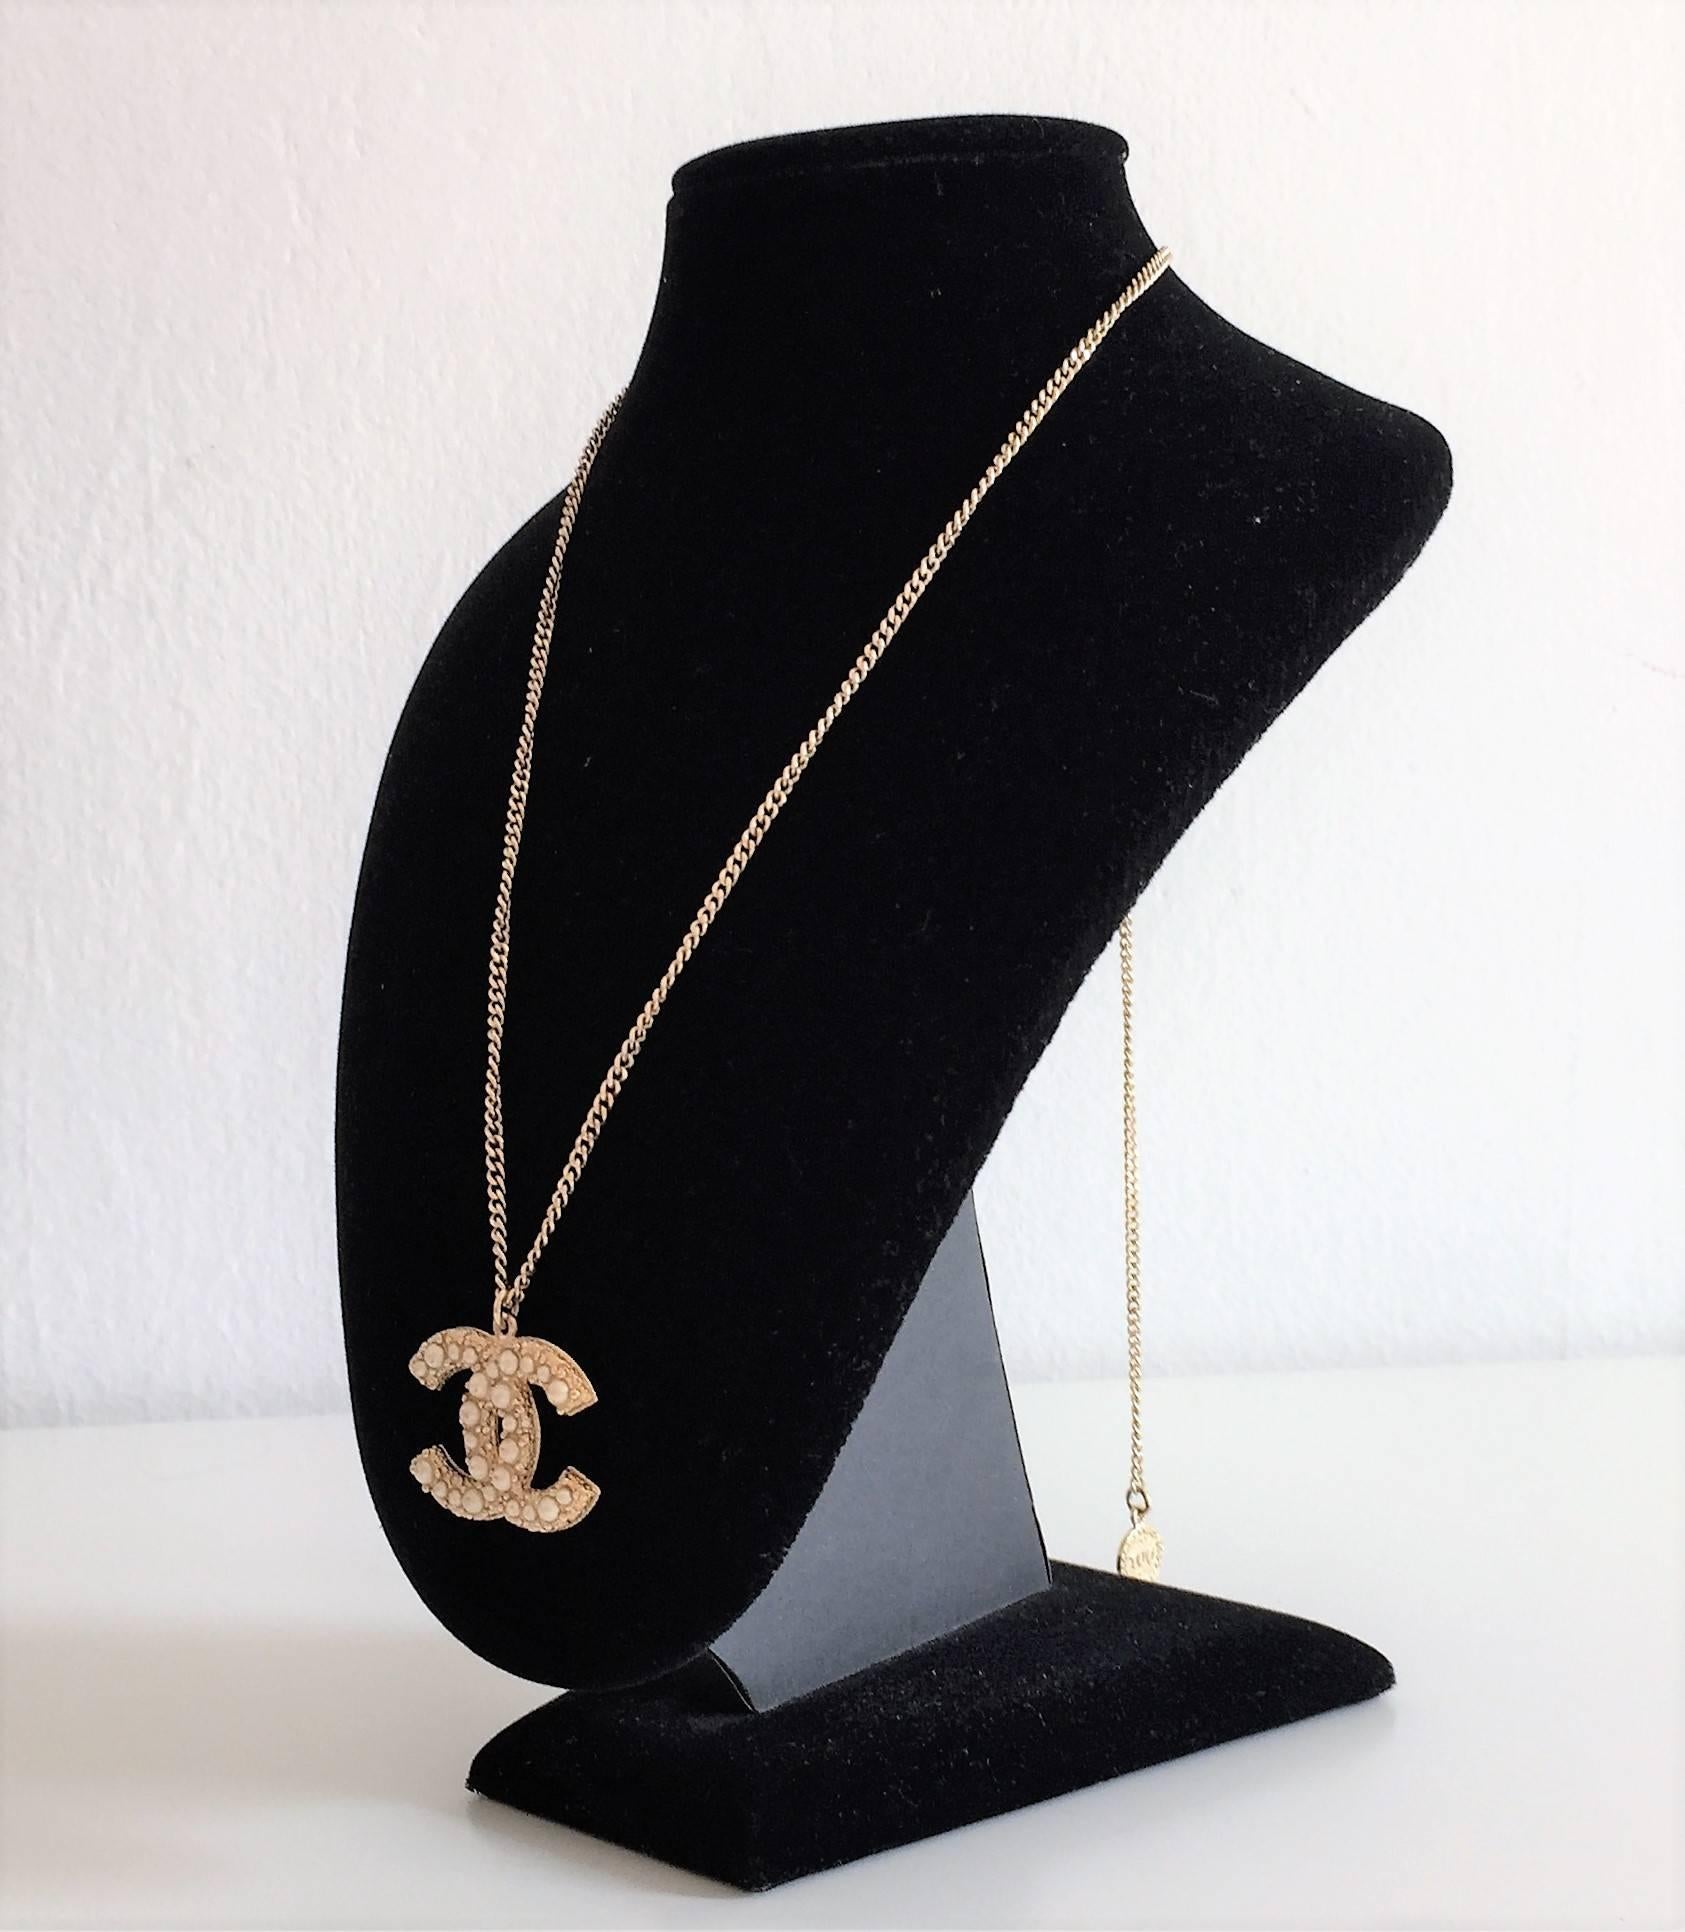 Chanel Limited Editions 100th Anniversary necklace with large CC logo pendant   cm 3x2, adjustable chain from 8